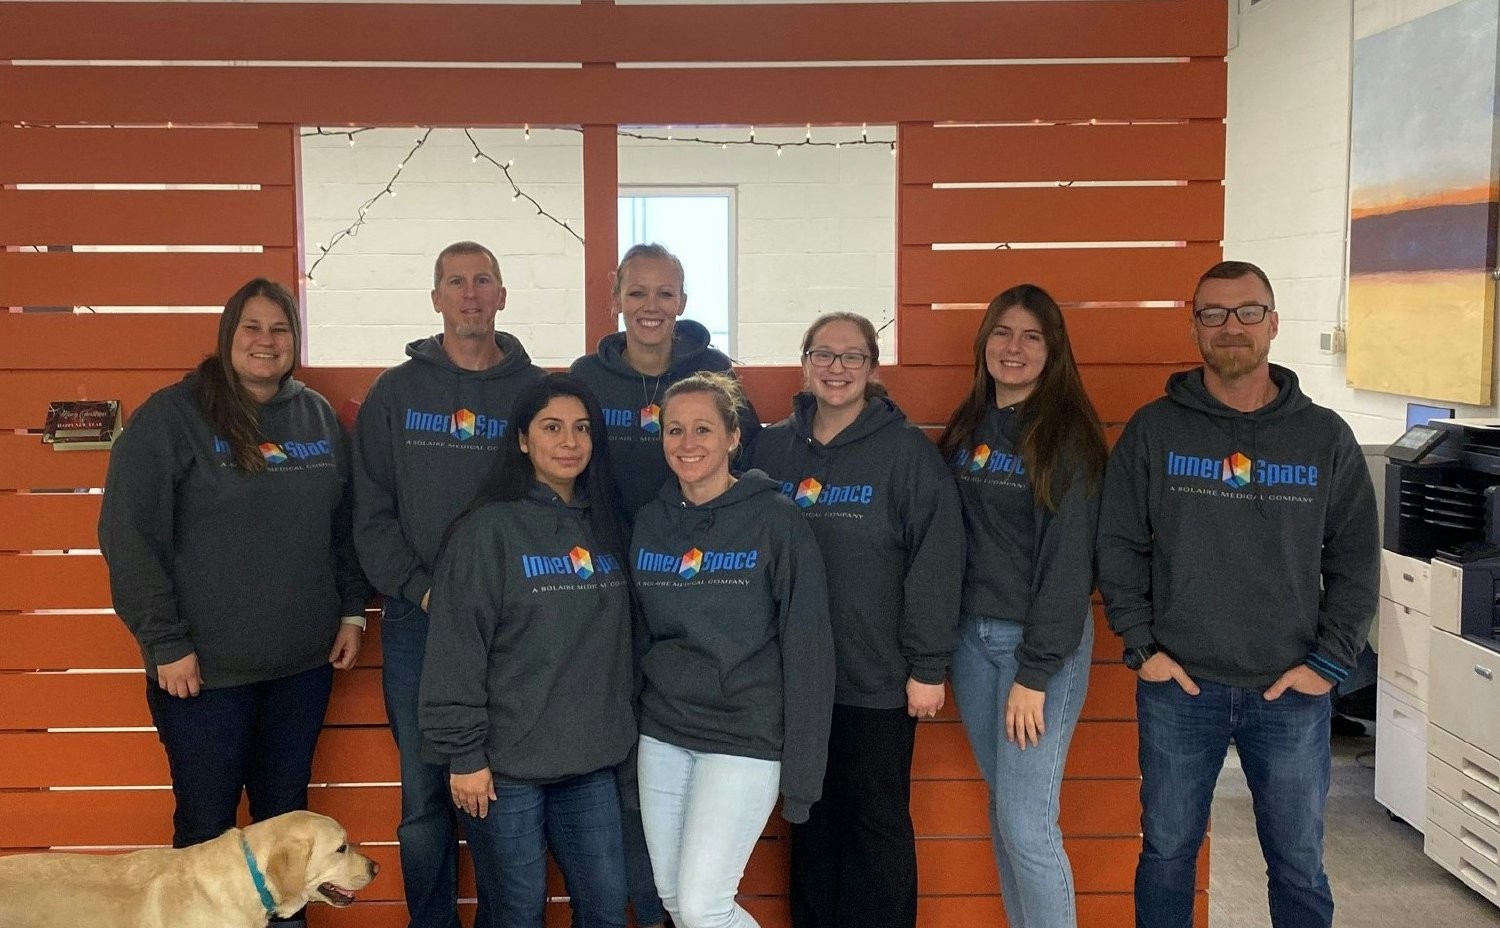 Sweatshirt day. Office team showing off their new sweatshirts. Winnie our office dog, keeping them in line. 